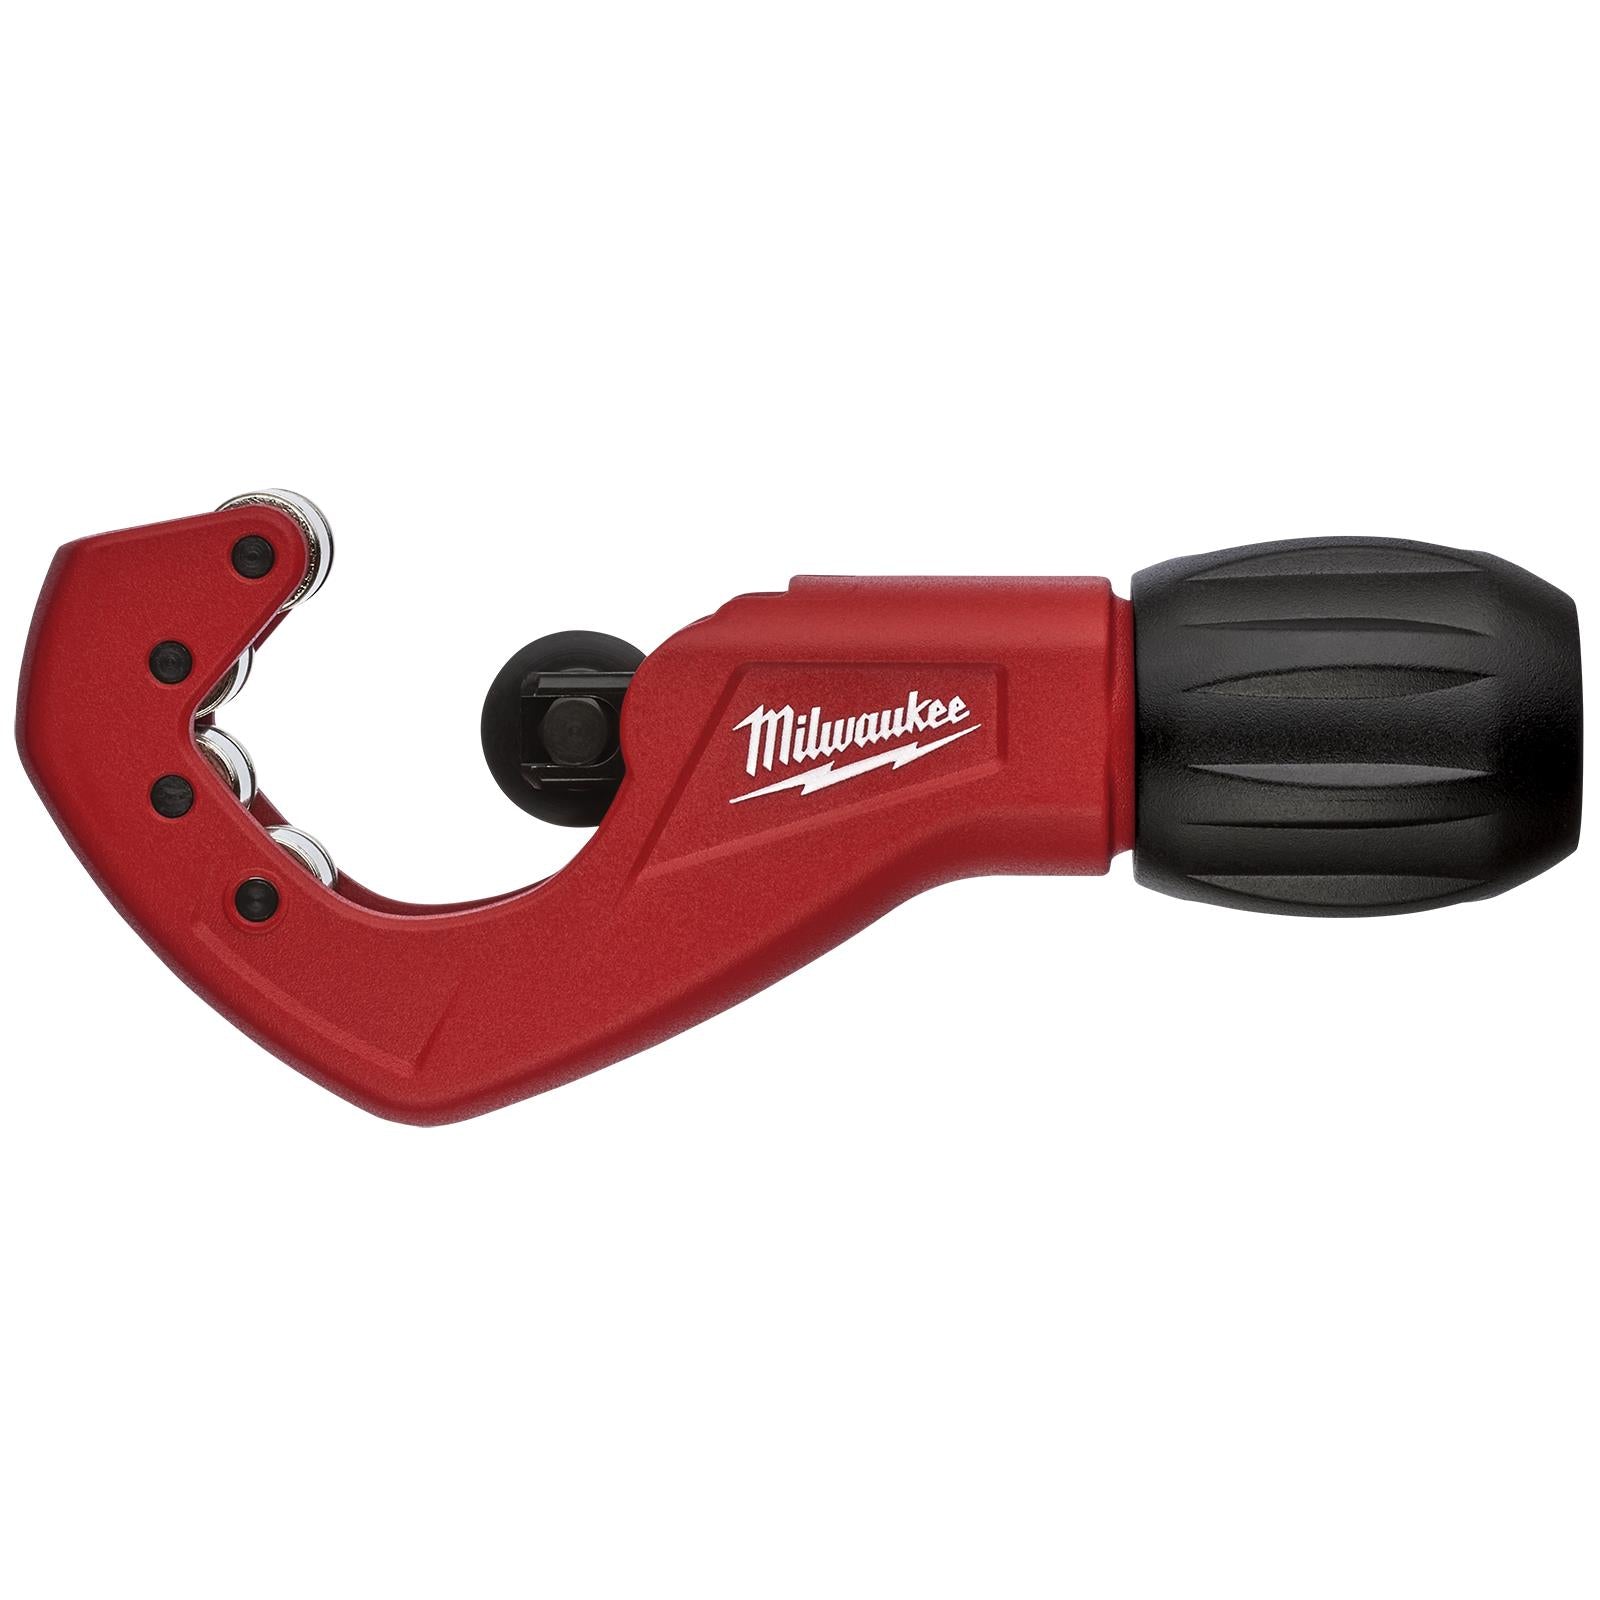 Milwaukee Copper Tubing Cutter Constant Swing 3 - 28mm Capacity